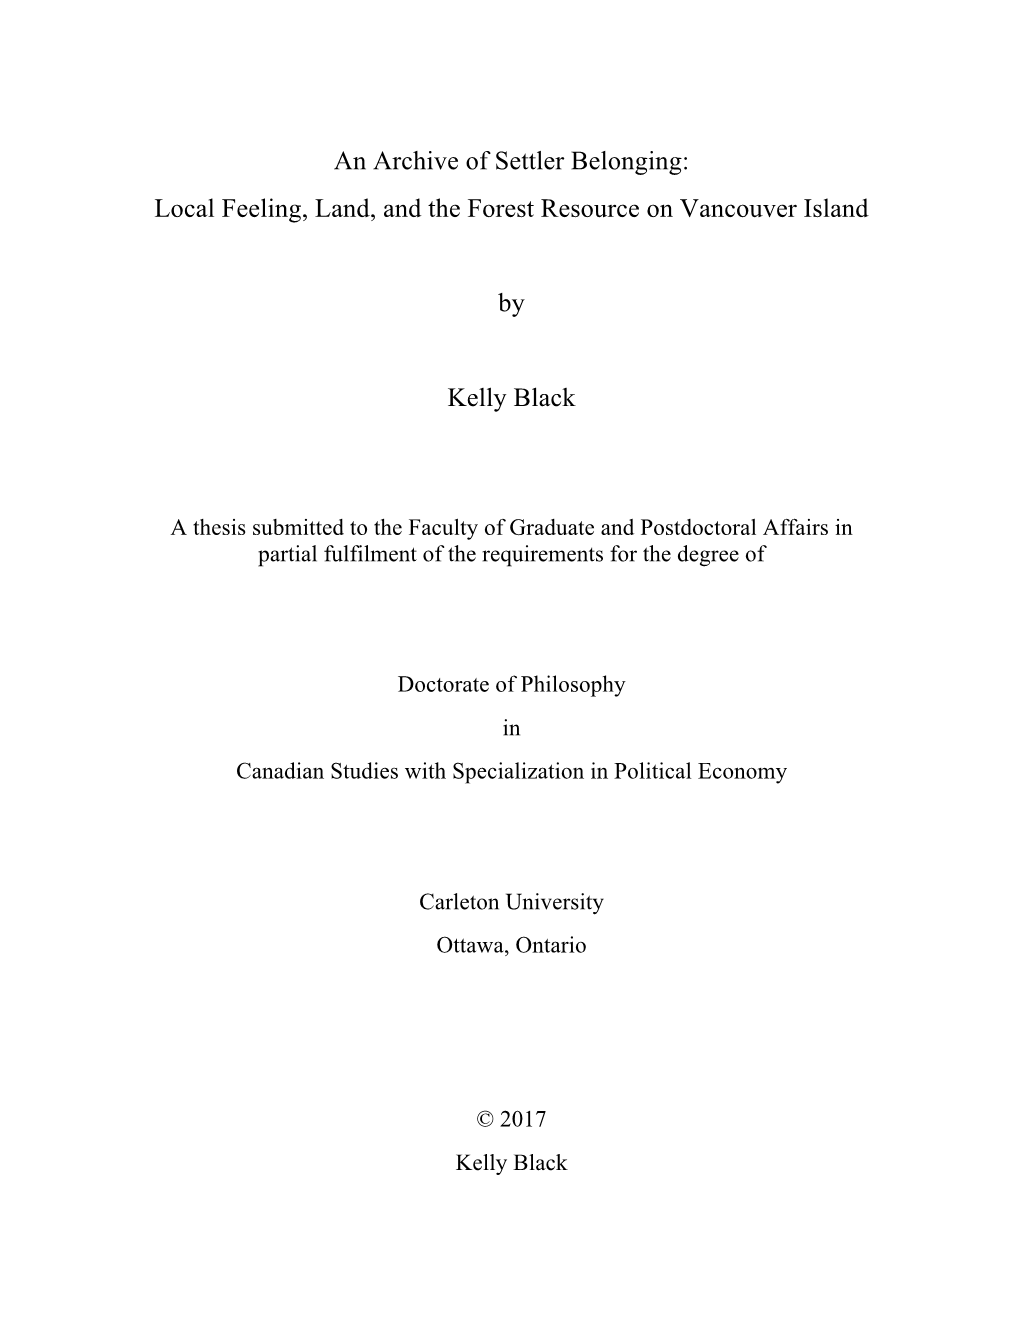 An Archive of Settler Belonging: Local Feeling, Land, and the Forest Resource on Vancouver Island by Kelly Black